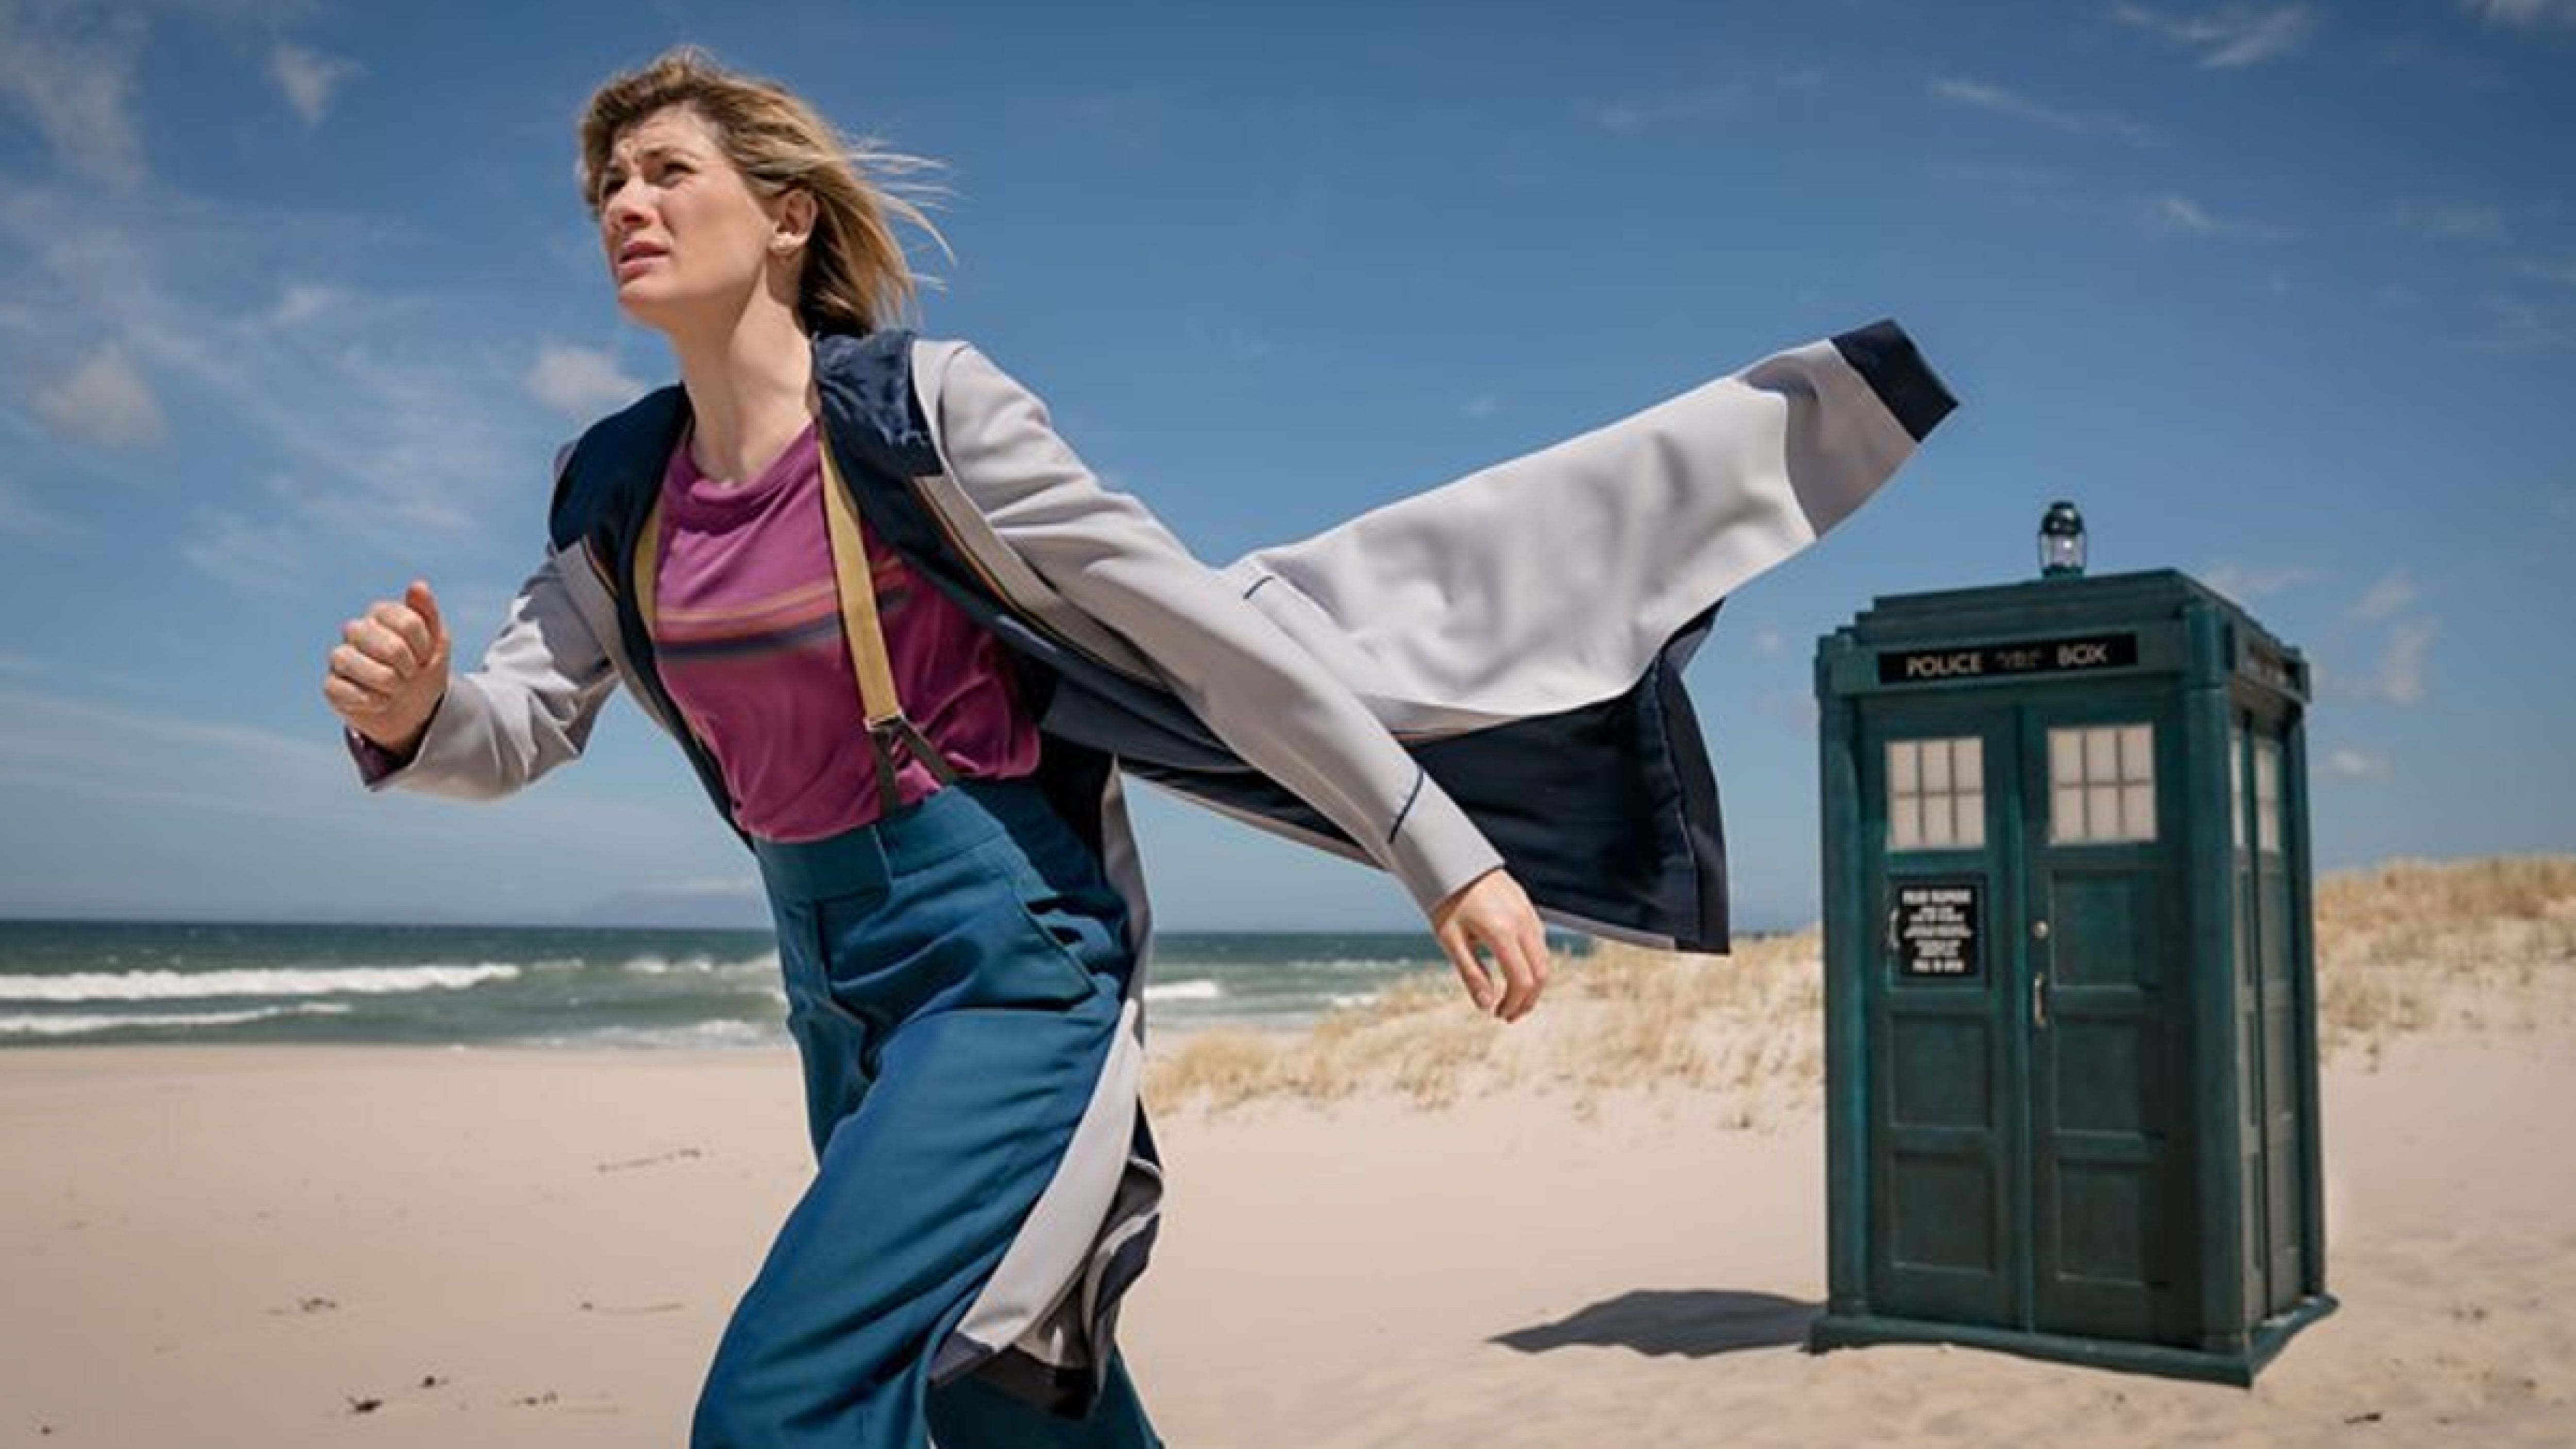 Doctor Who’s Jodie Whittaker and Chris Chibnall to Exit in 2022